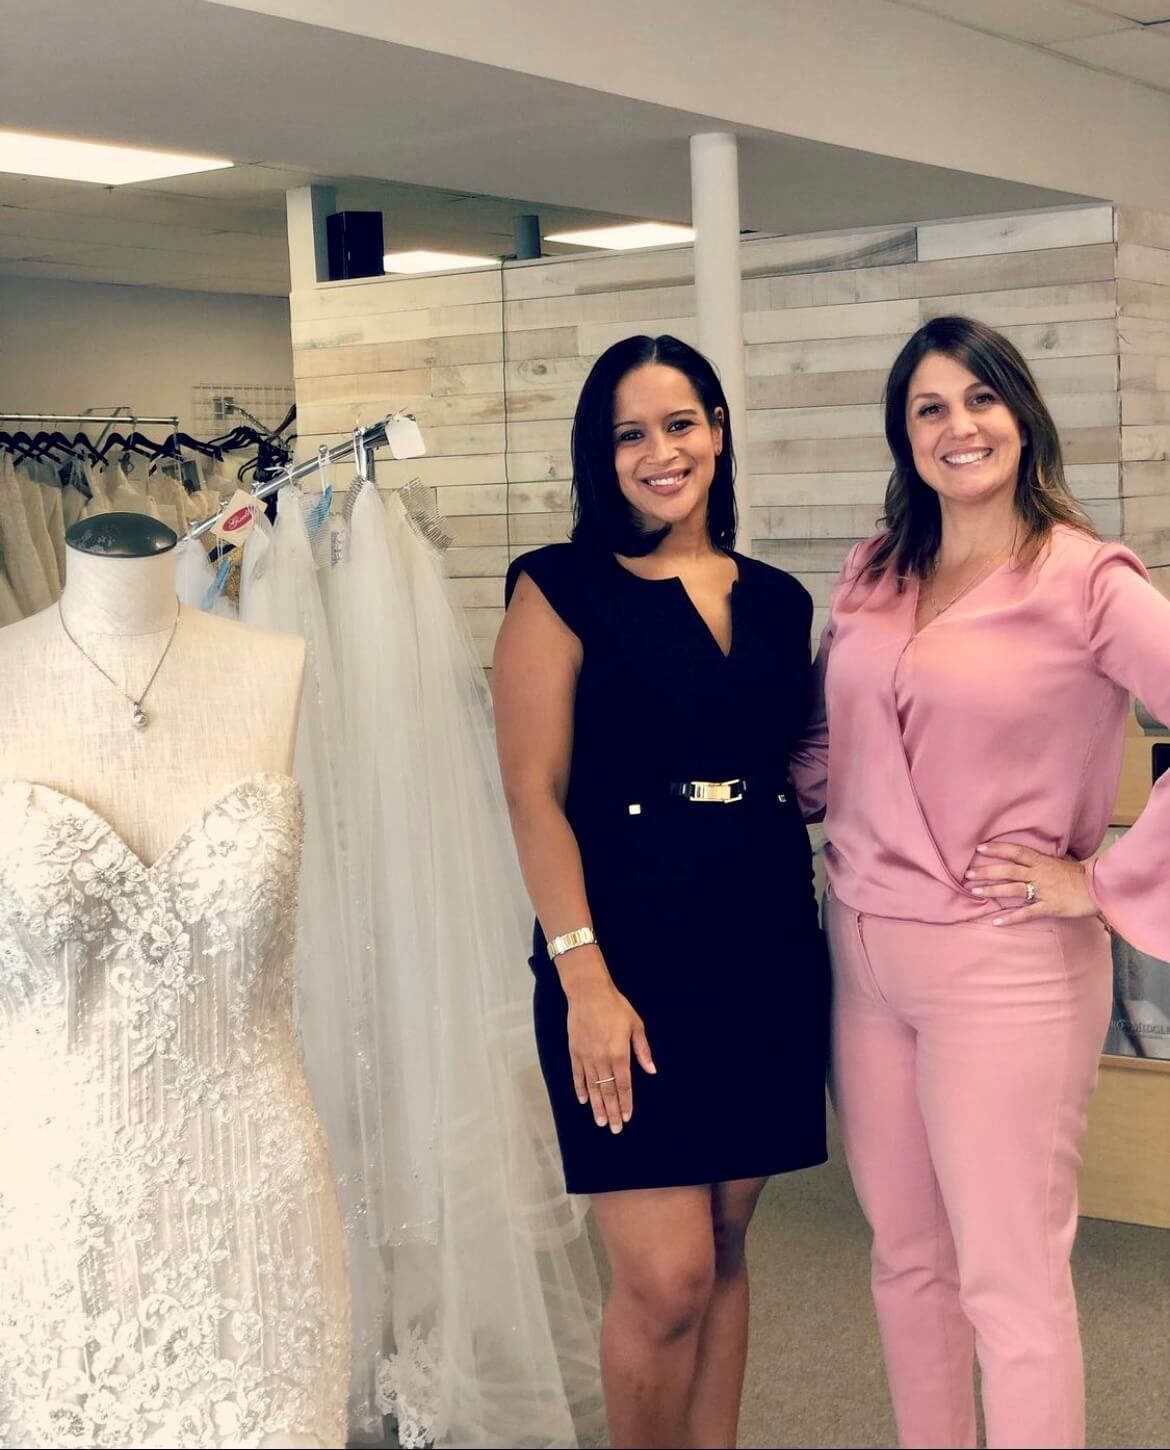 Find Your Dream Dress For Less at Fantasia Bridal’s Sample Sale!